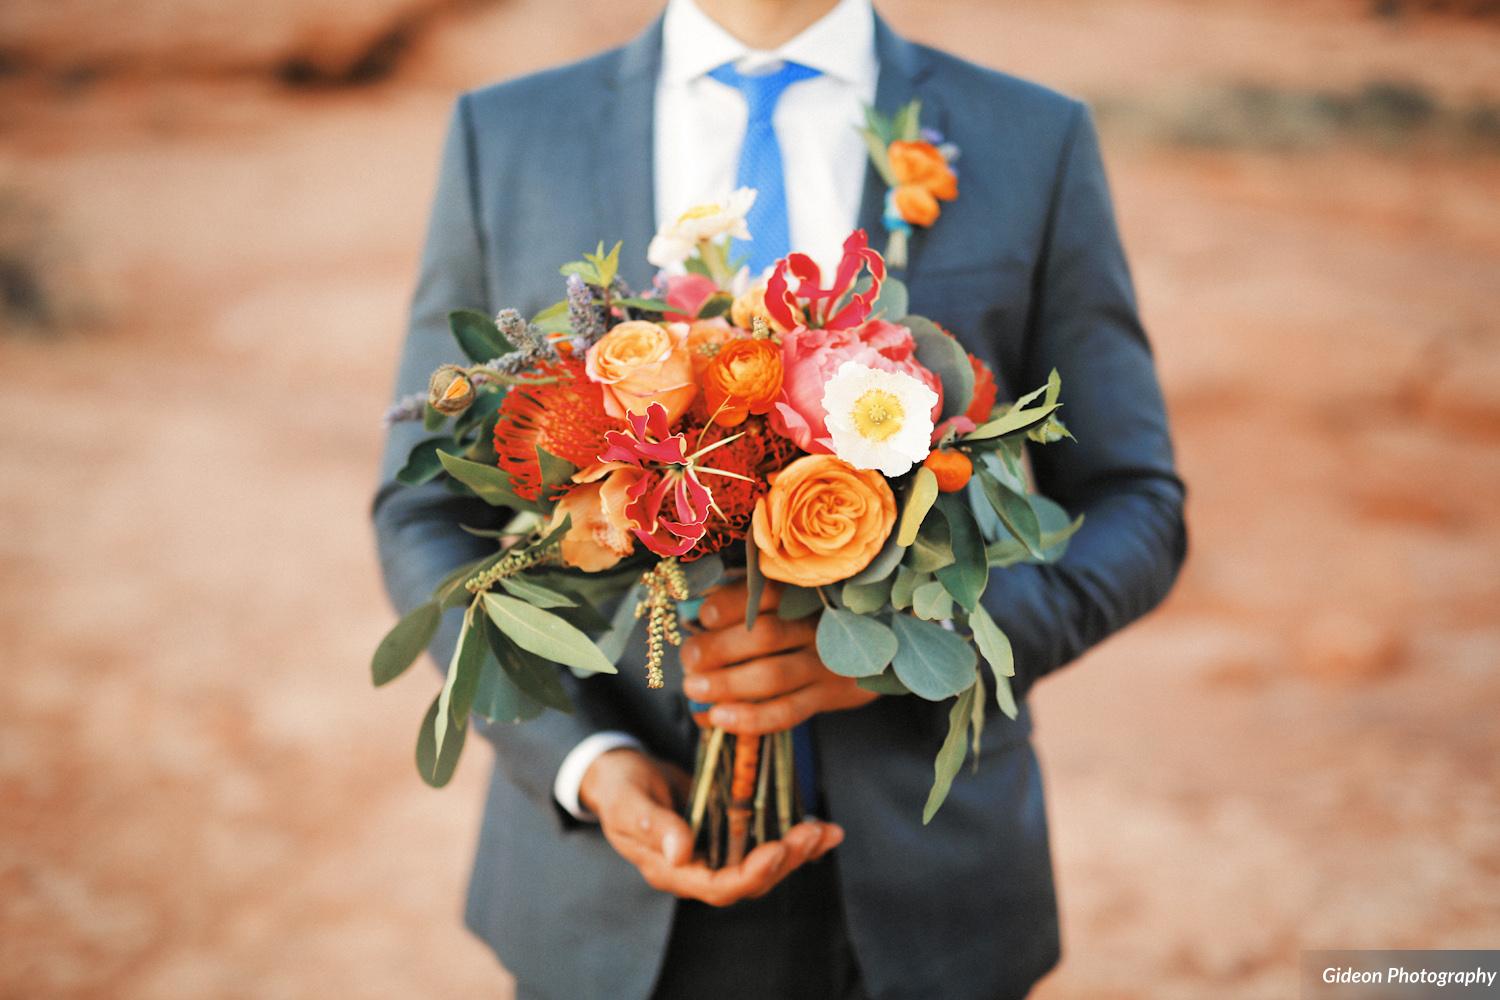 bridal bouquet with gold roses, coral peonies, anemones, gloriosa lilies, and protea